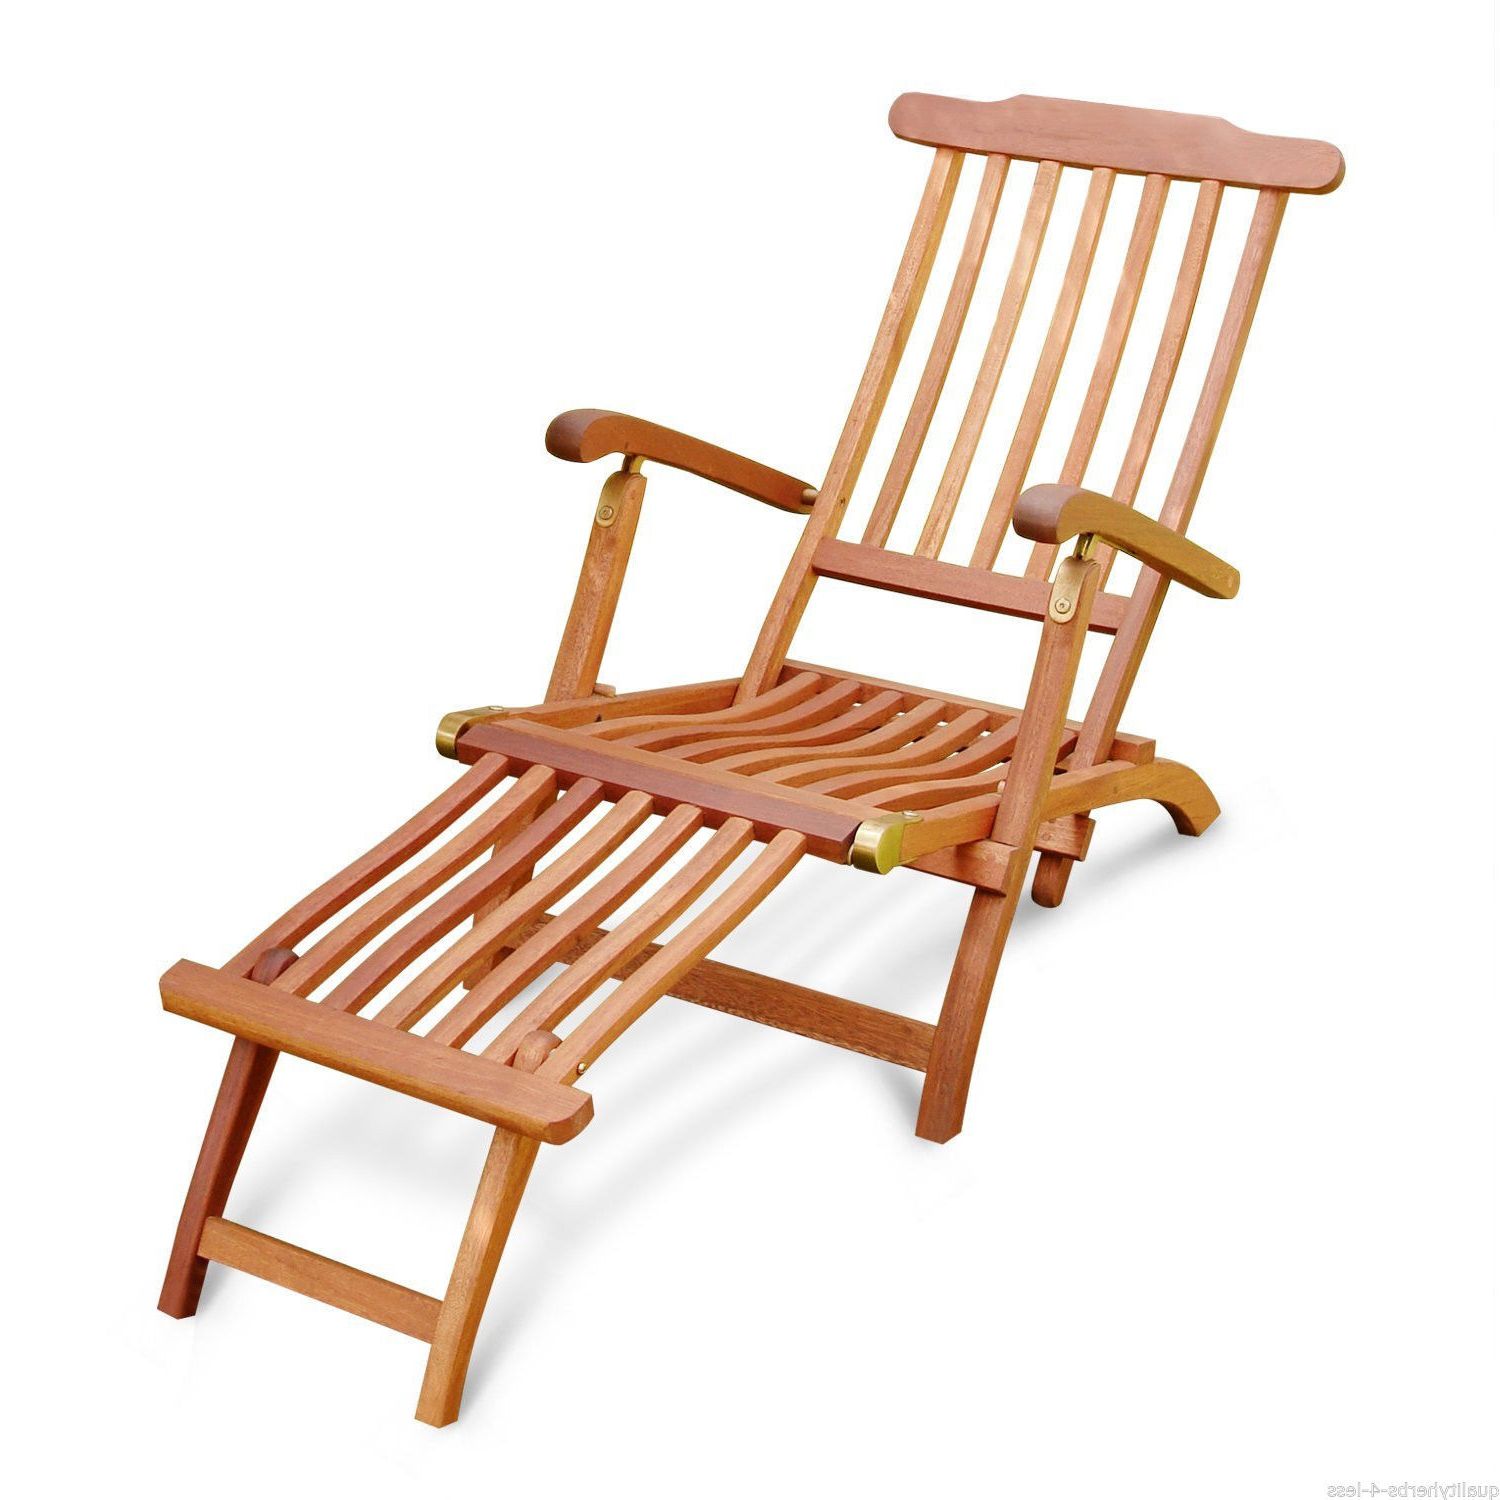 Eucalyptus Stackable Patio Chairs With Widely Used Folding Outdoor Eucalyptus Hardwood Steamer Sun Chaise Lounge Chair (View 10 of 15)